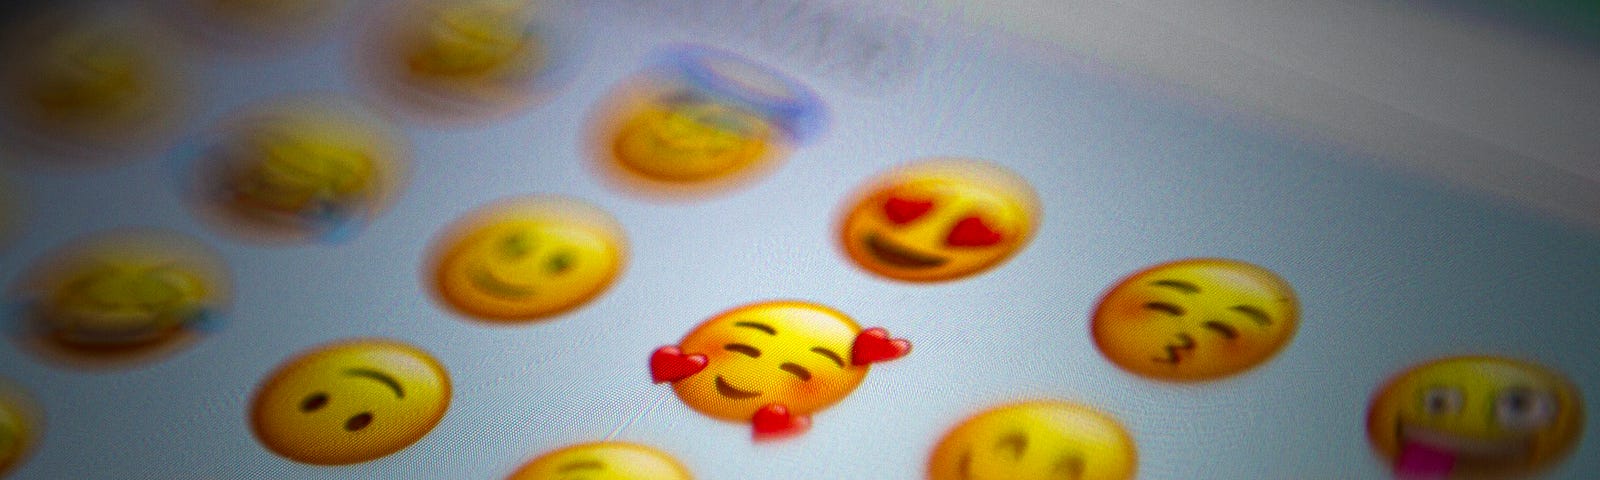 A screenshot of emoji’s centered on a smiley face with hearts.